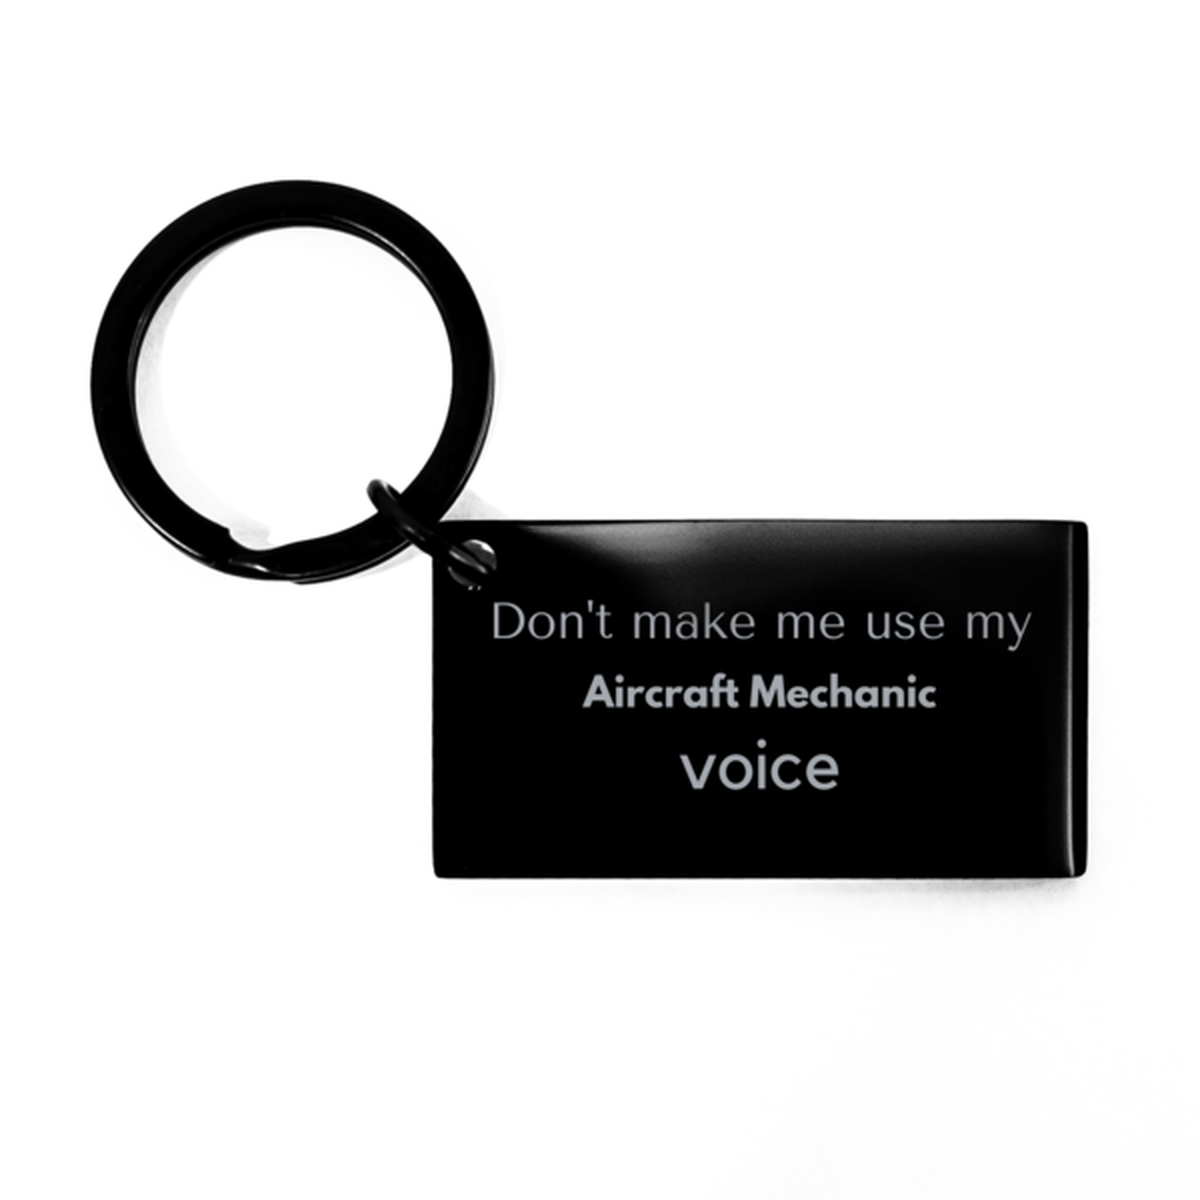 Don't make me use my Aircraft Mechanic voice, Sarcasm Aircraft Mechanic Gifts, Christmas Aircraft Mechanic Keychain Birthday Unique Gifts For Aircraft Mechanic Coworkers, Men, Women, Colleague, Friends